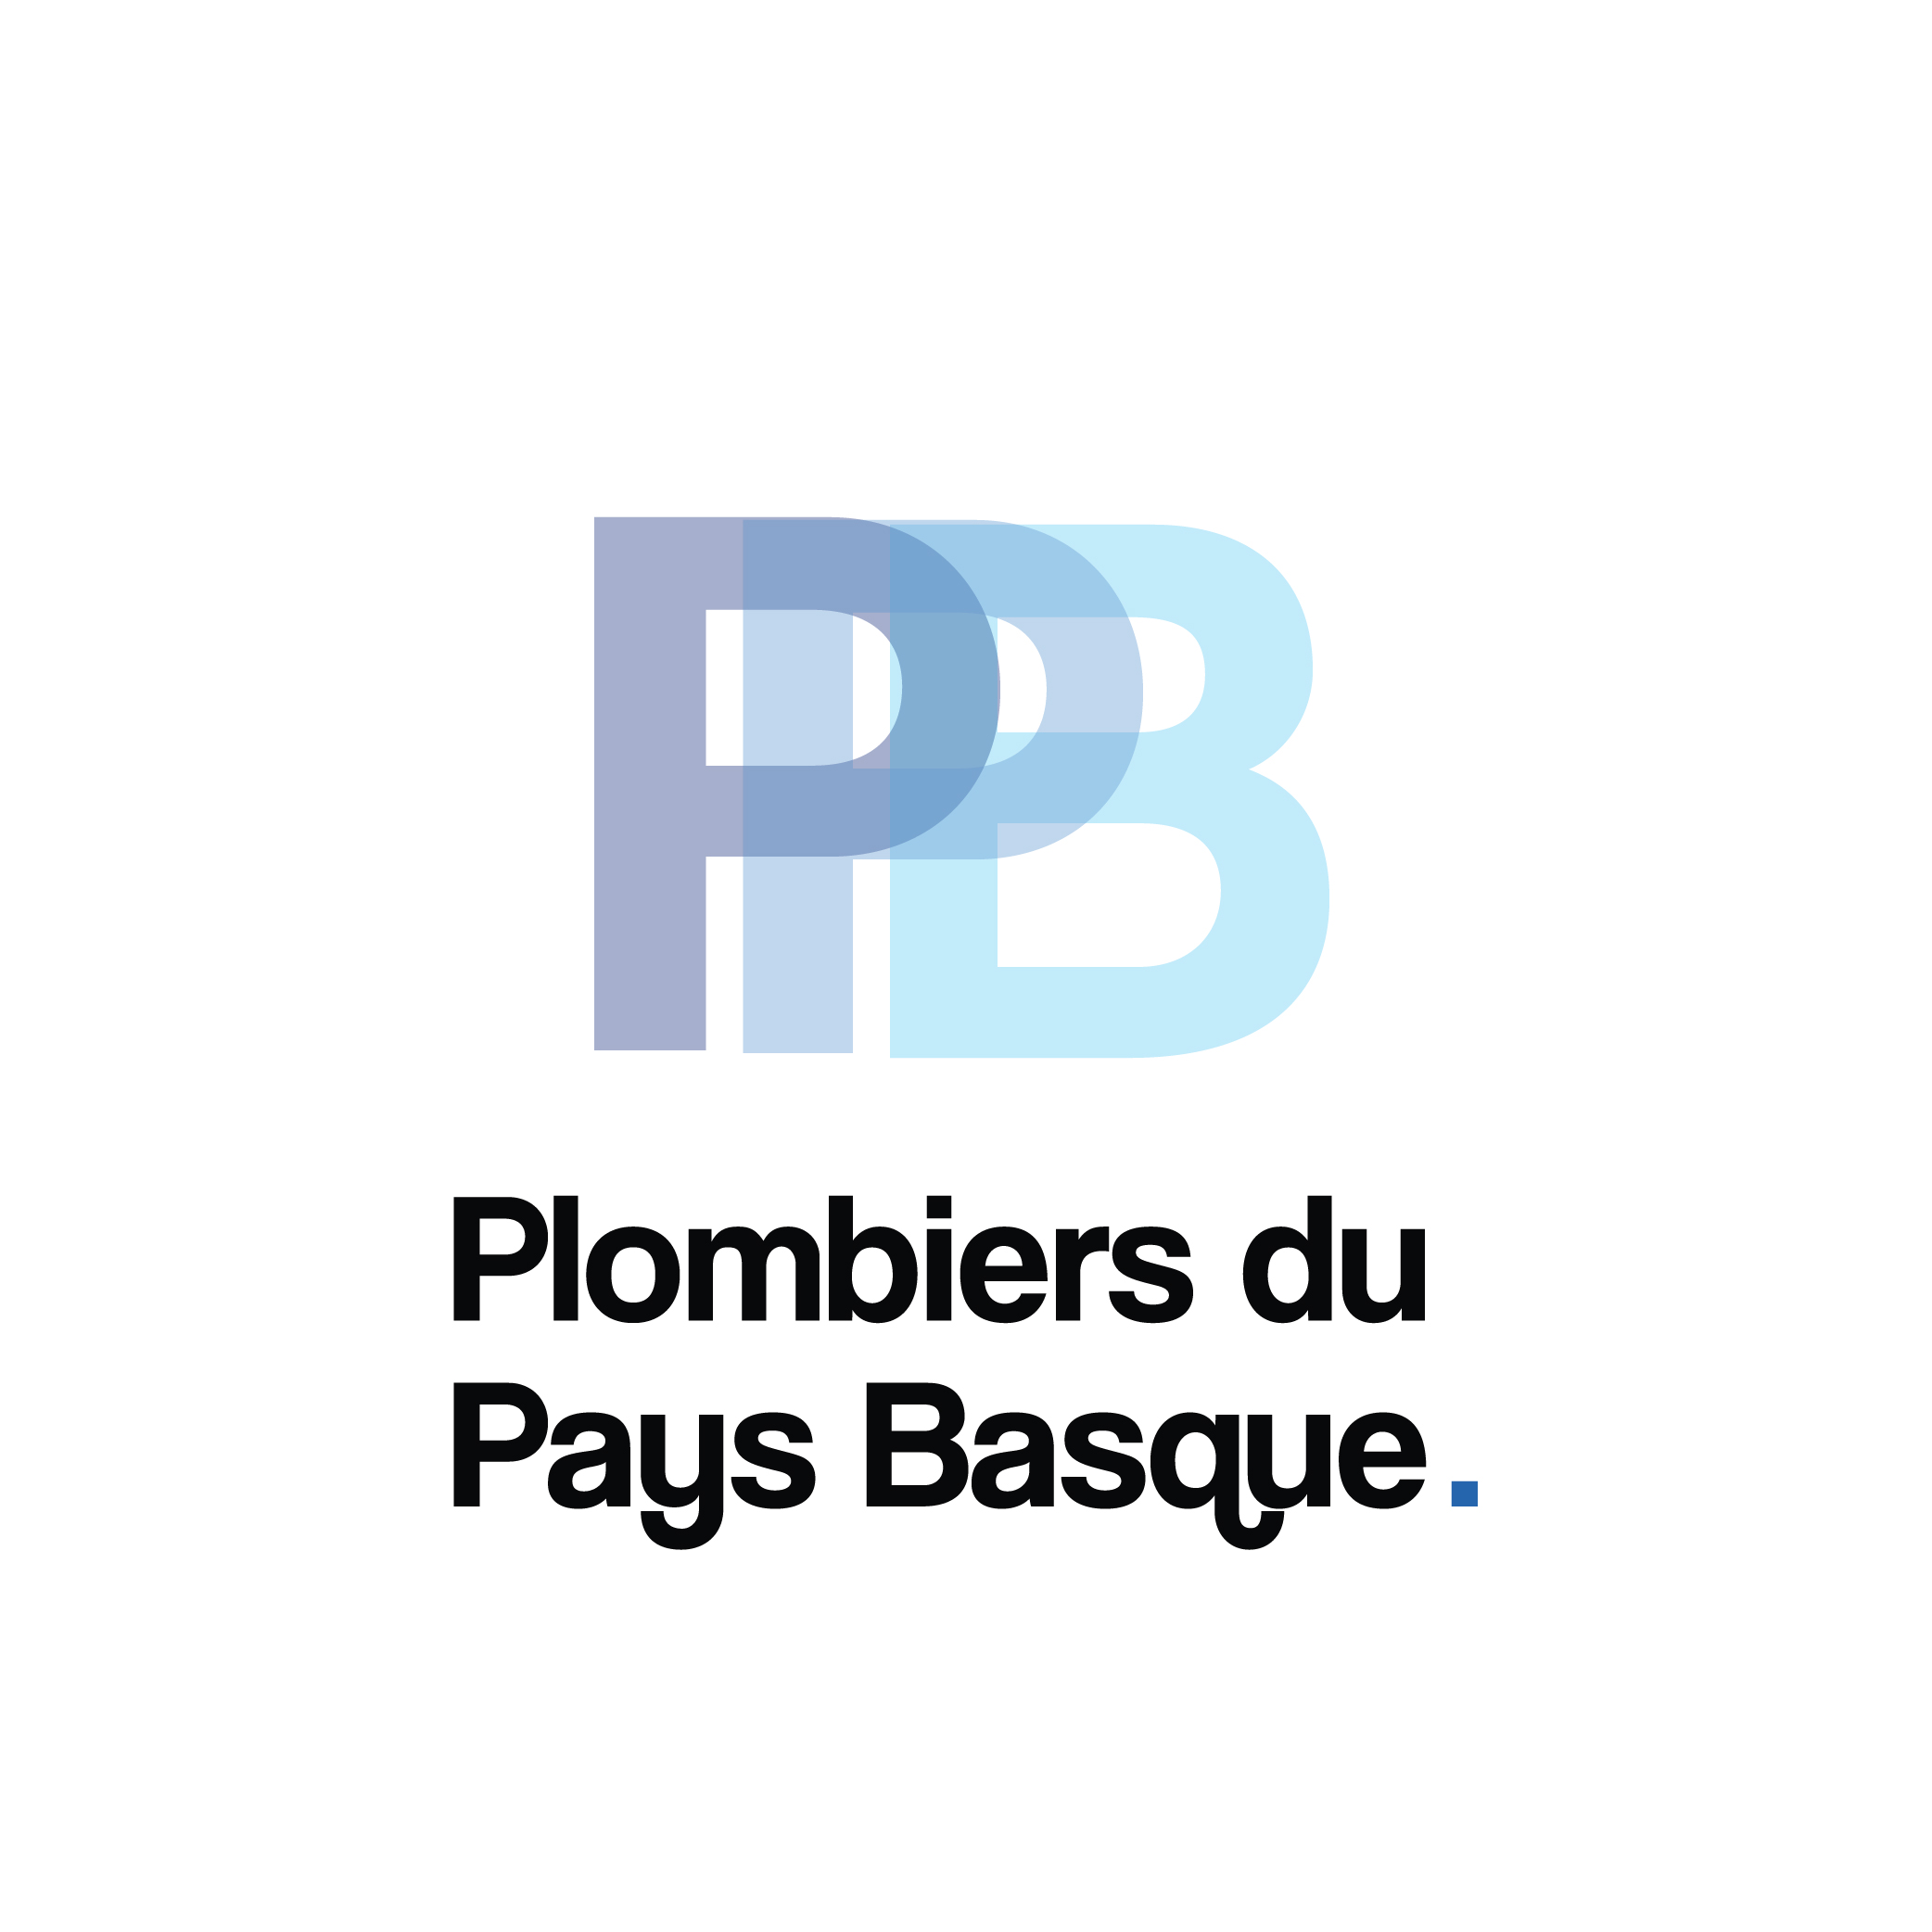 Logotype - Plombiers du Pays Basque - Plombiers / Chauffagistes